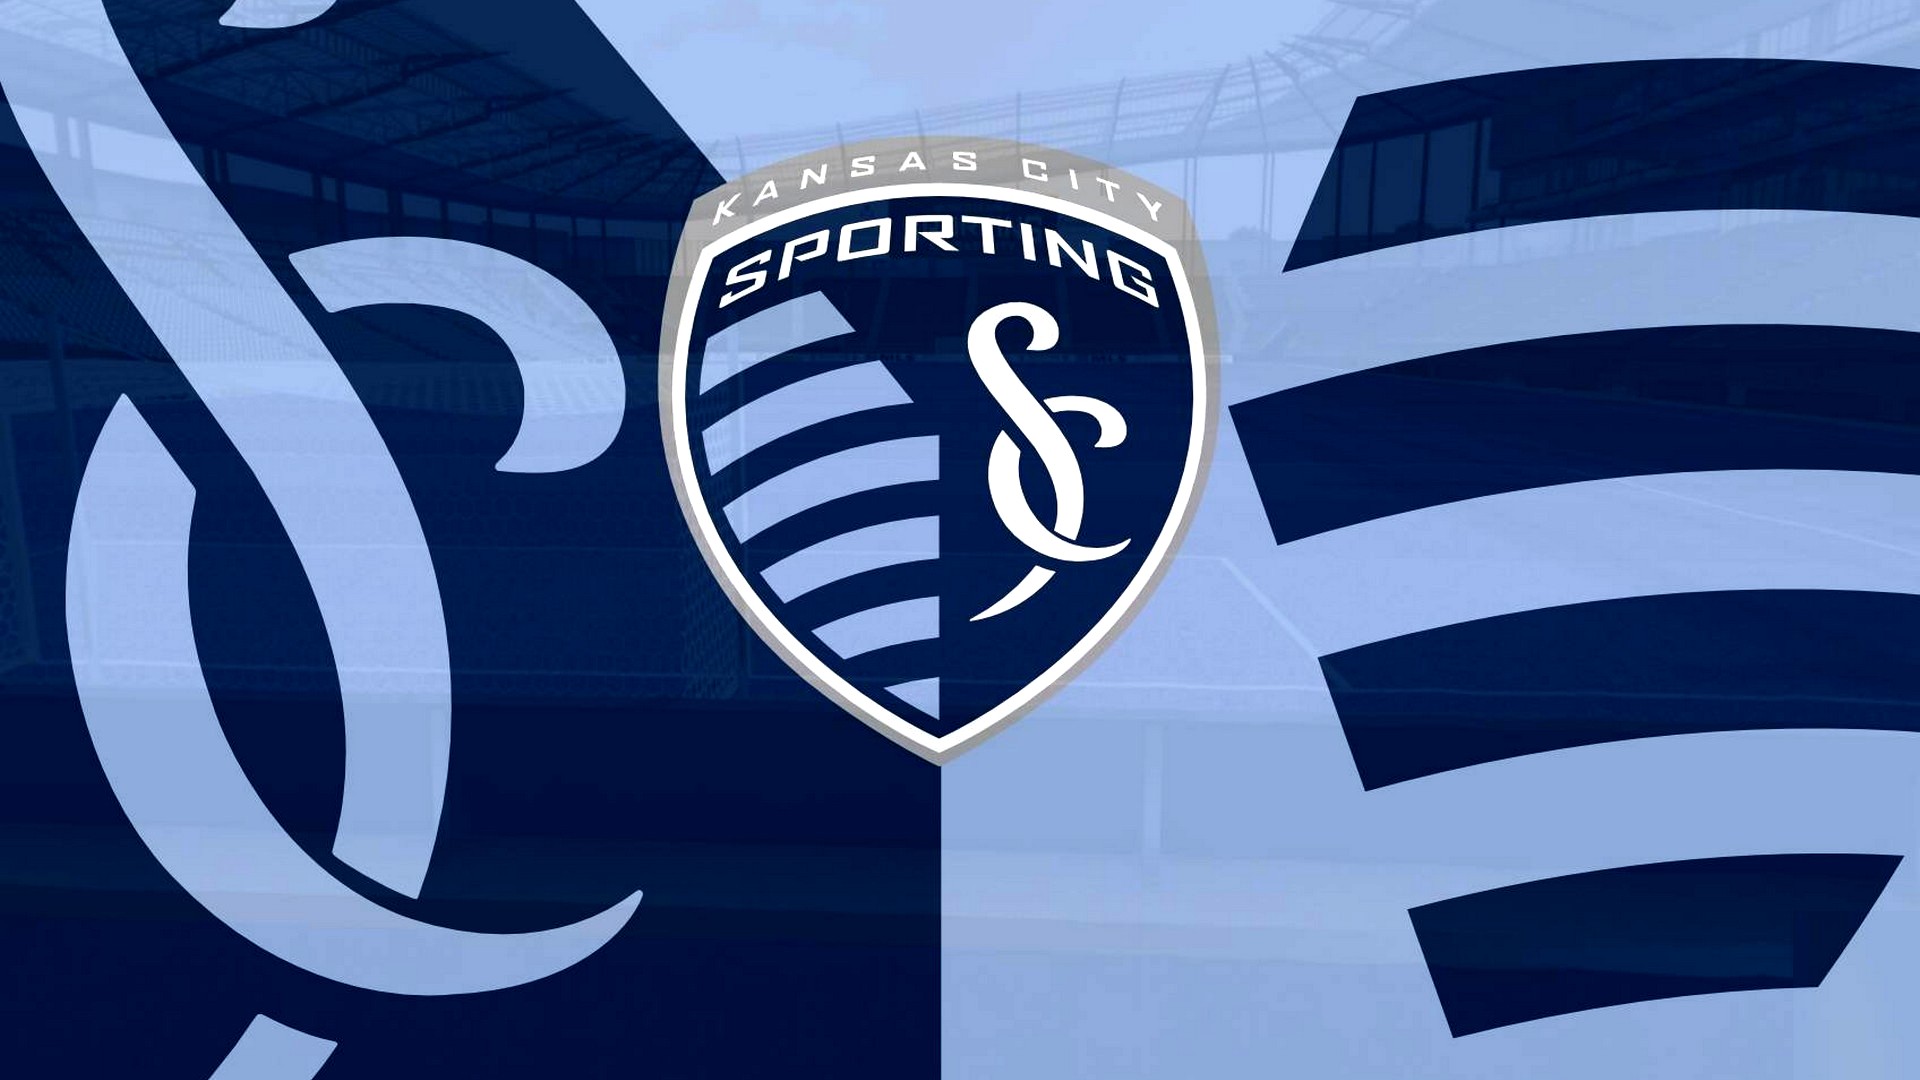 Sporting KC Wallpaper HD with high-resolution 1920x1080 pixel. You can use this wallpaper for your Desktop Computers, Mac Screensavers, Windows Backgrounds, iPhone Wallpapers, Tablet or Android Lock screen and another Mobile device